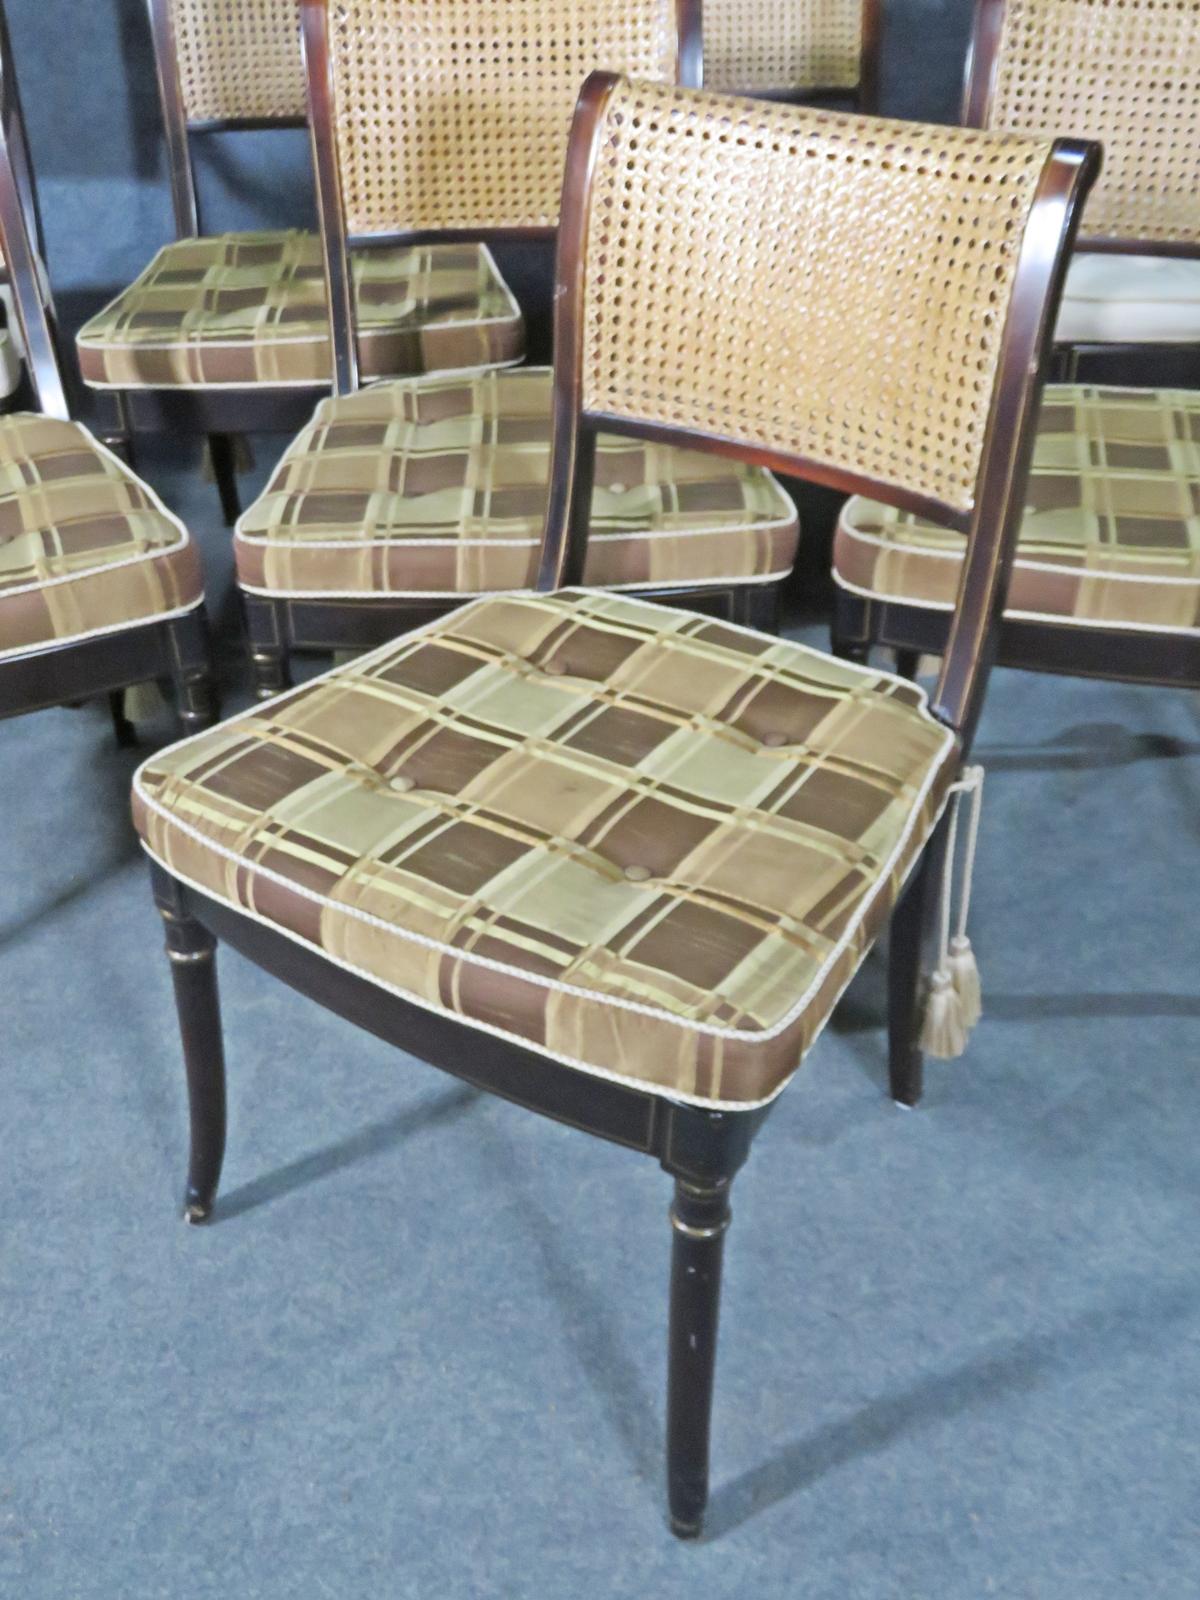 dining chairs set of 4